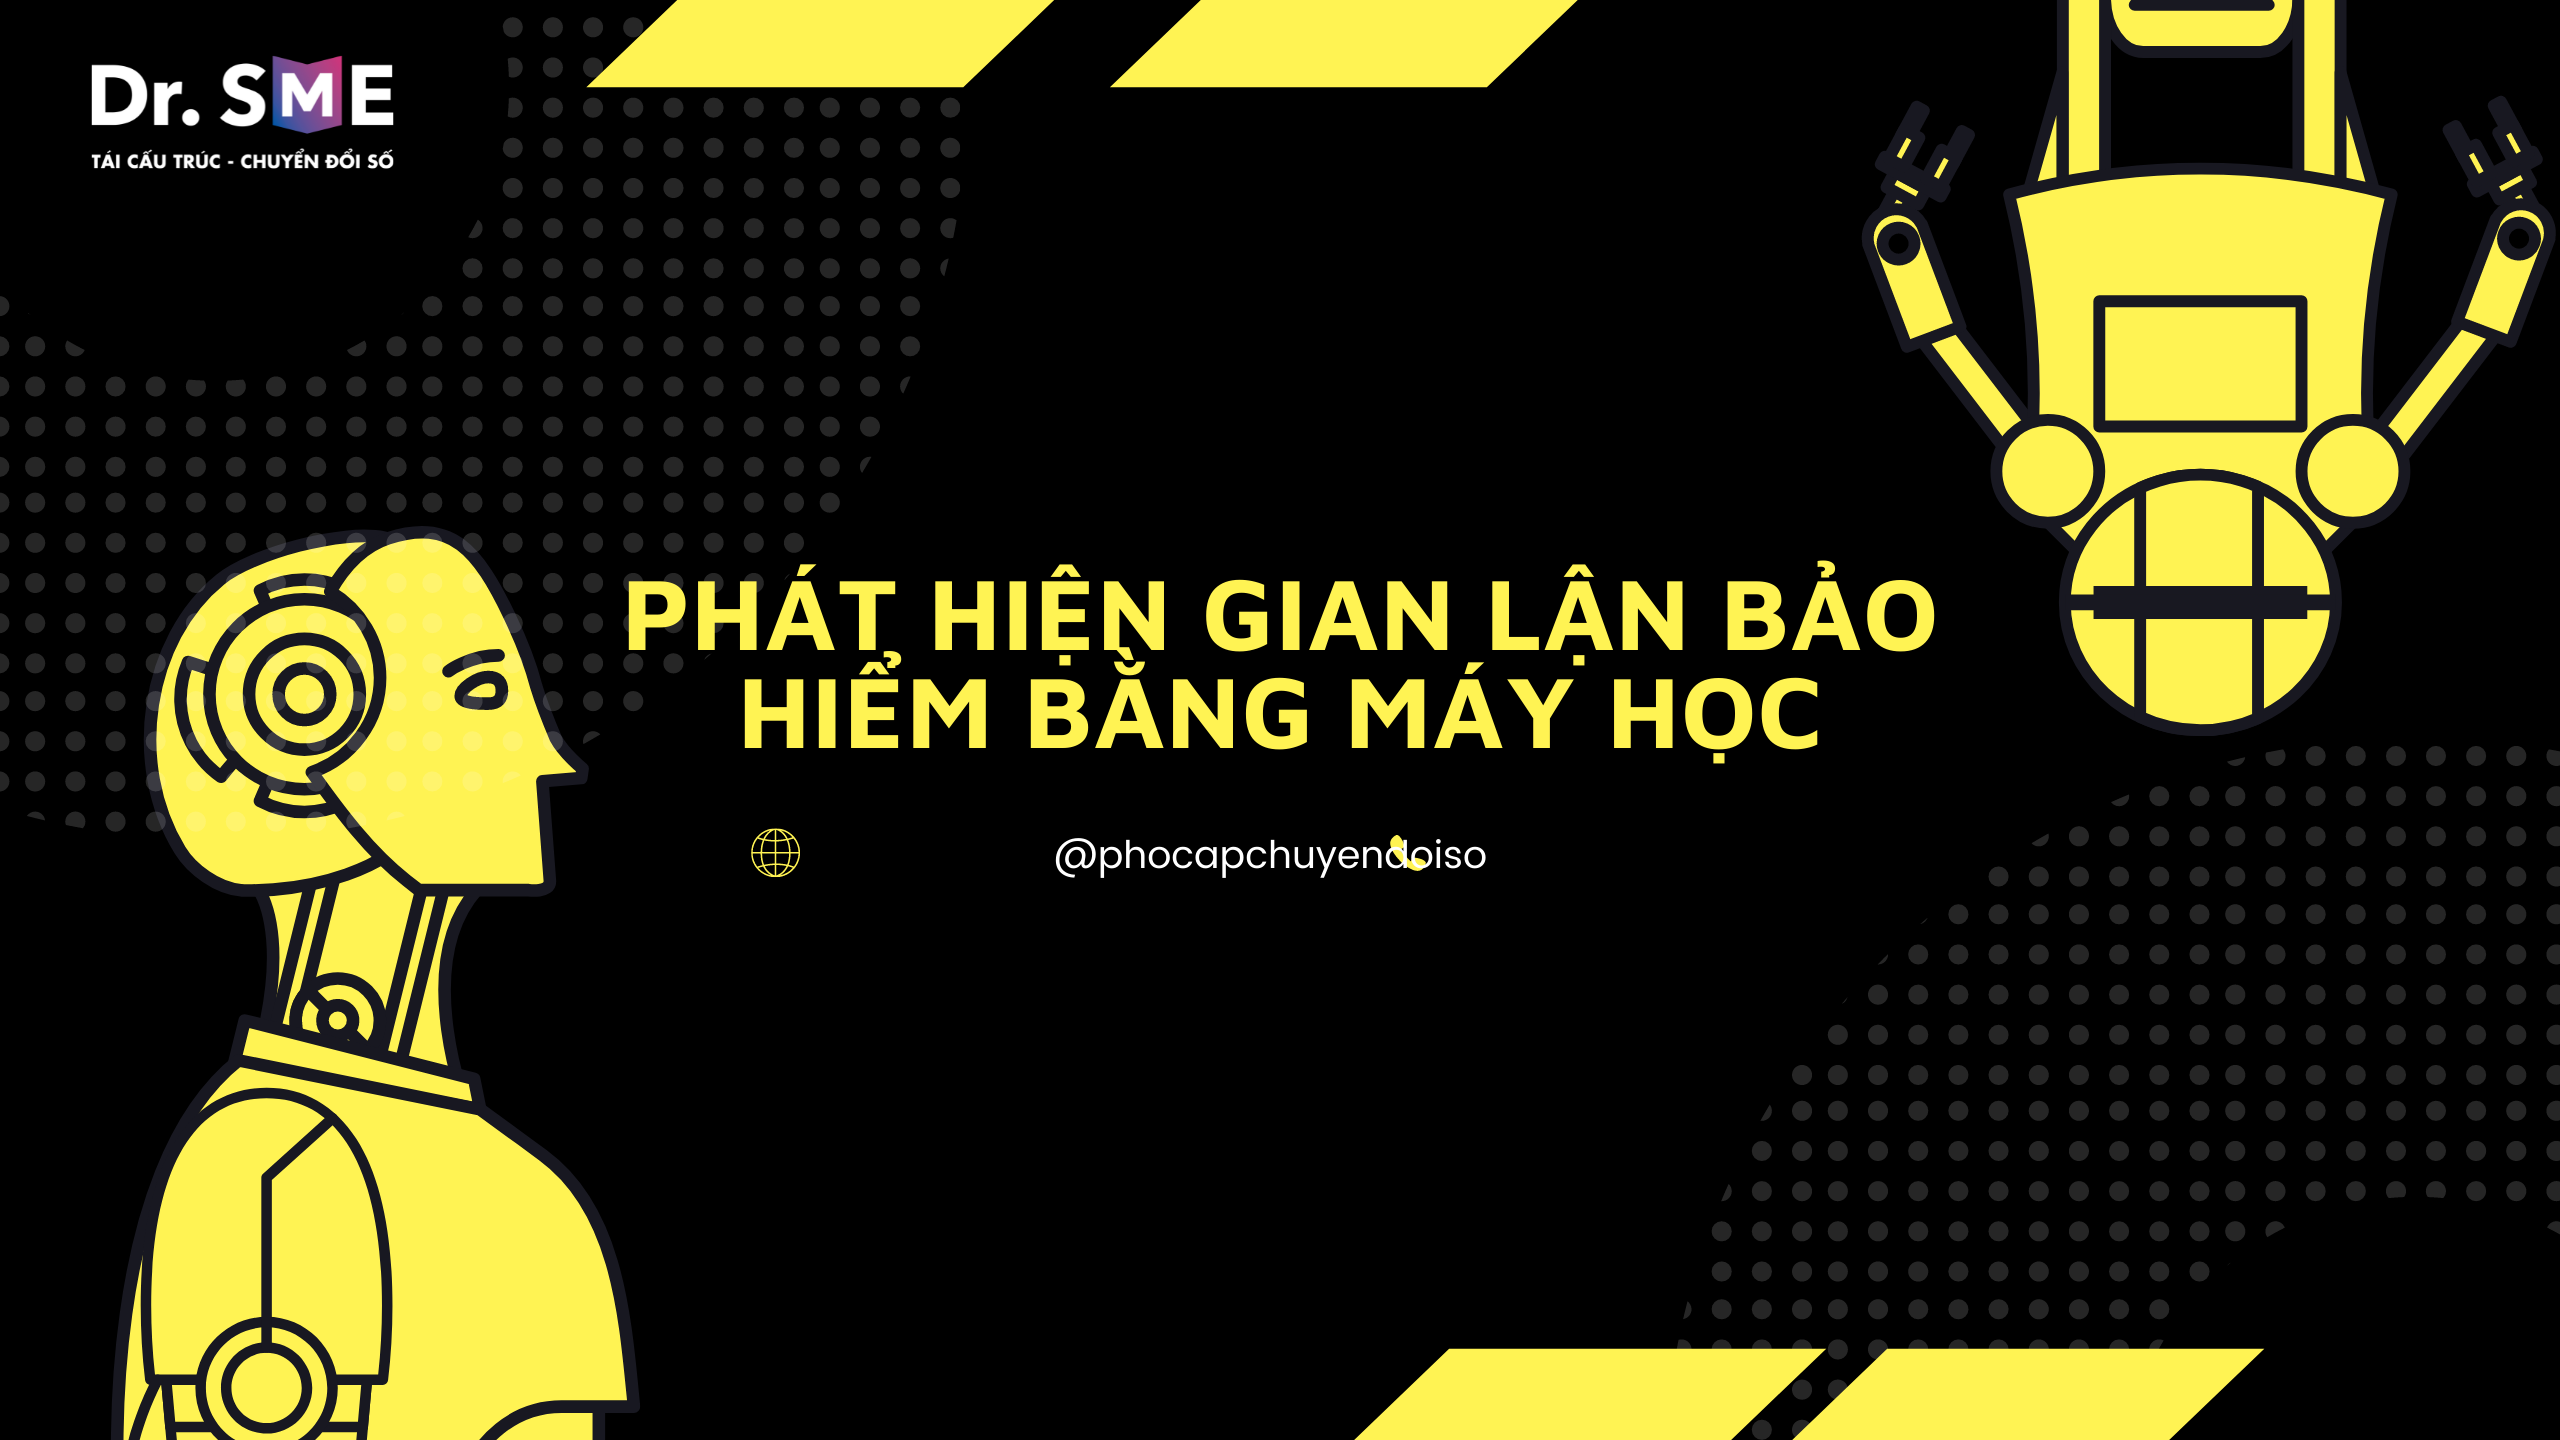 Black Yellow Colorful Technothink Youtube Channel Art Sme